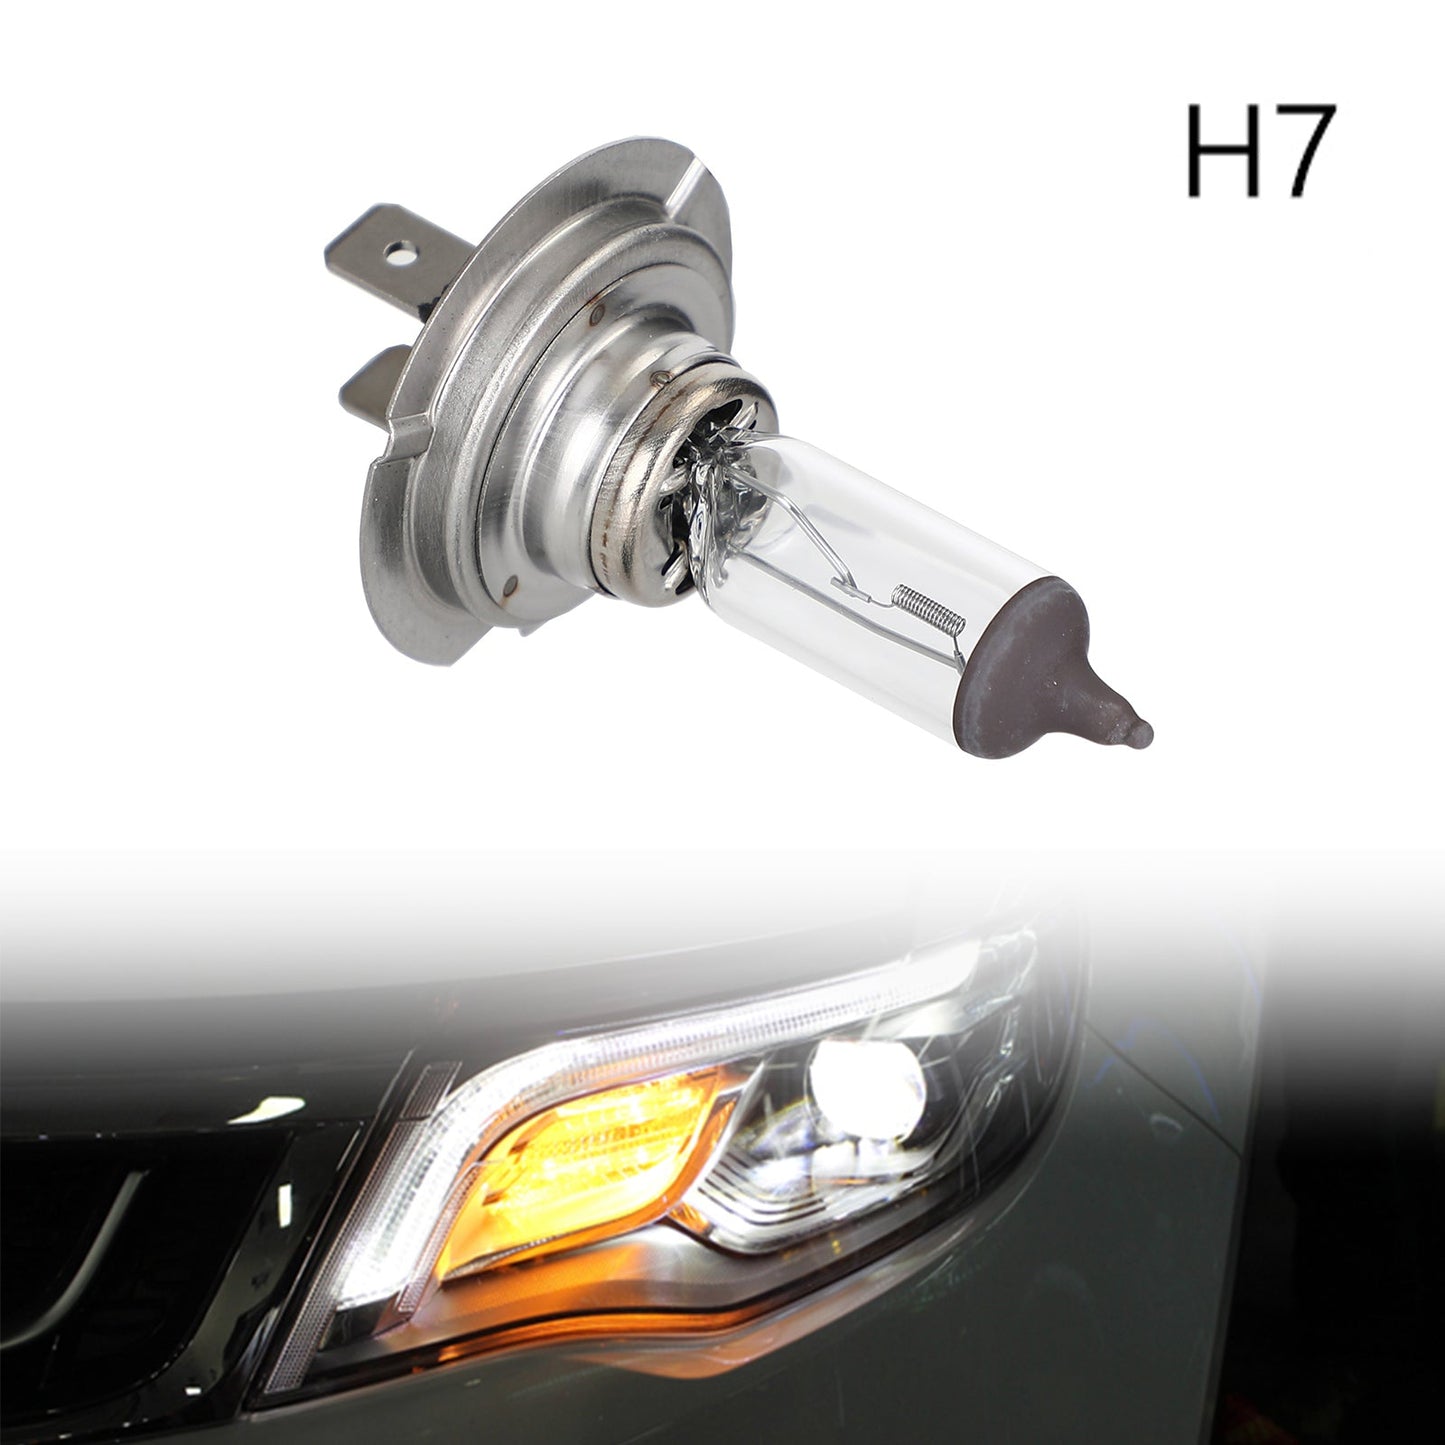 For Vosla H7 Bulb 12V 80W Light Auxiliary Lamp 28358 PX26d